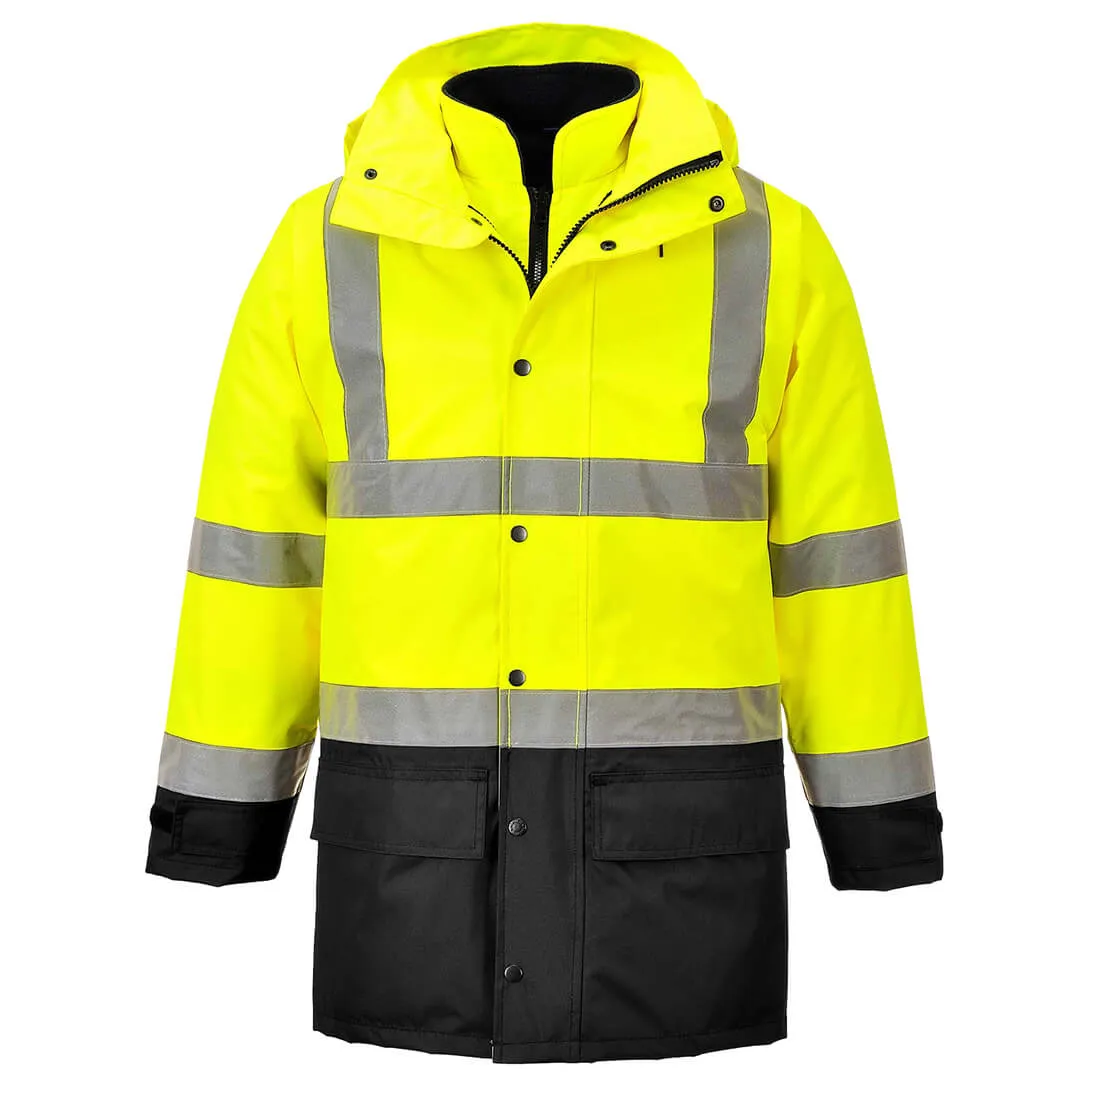 Oxford Weave 300D Class 3 Hi Vis 5-in1 Executive Jacket - Yellow / Black, M